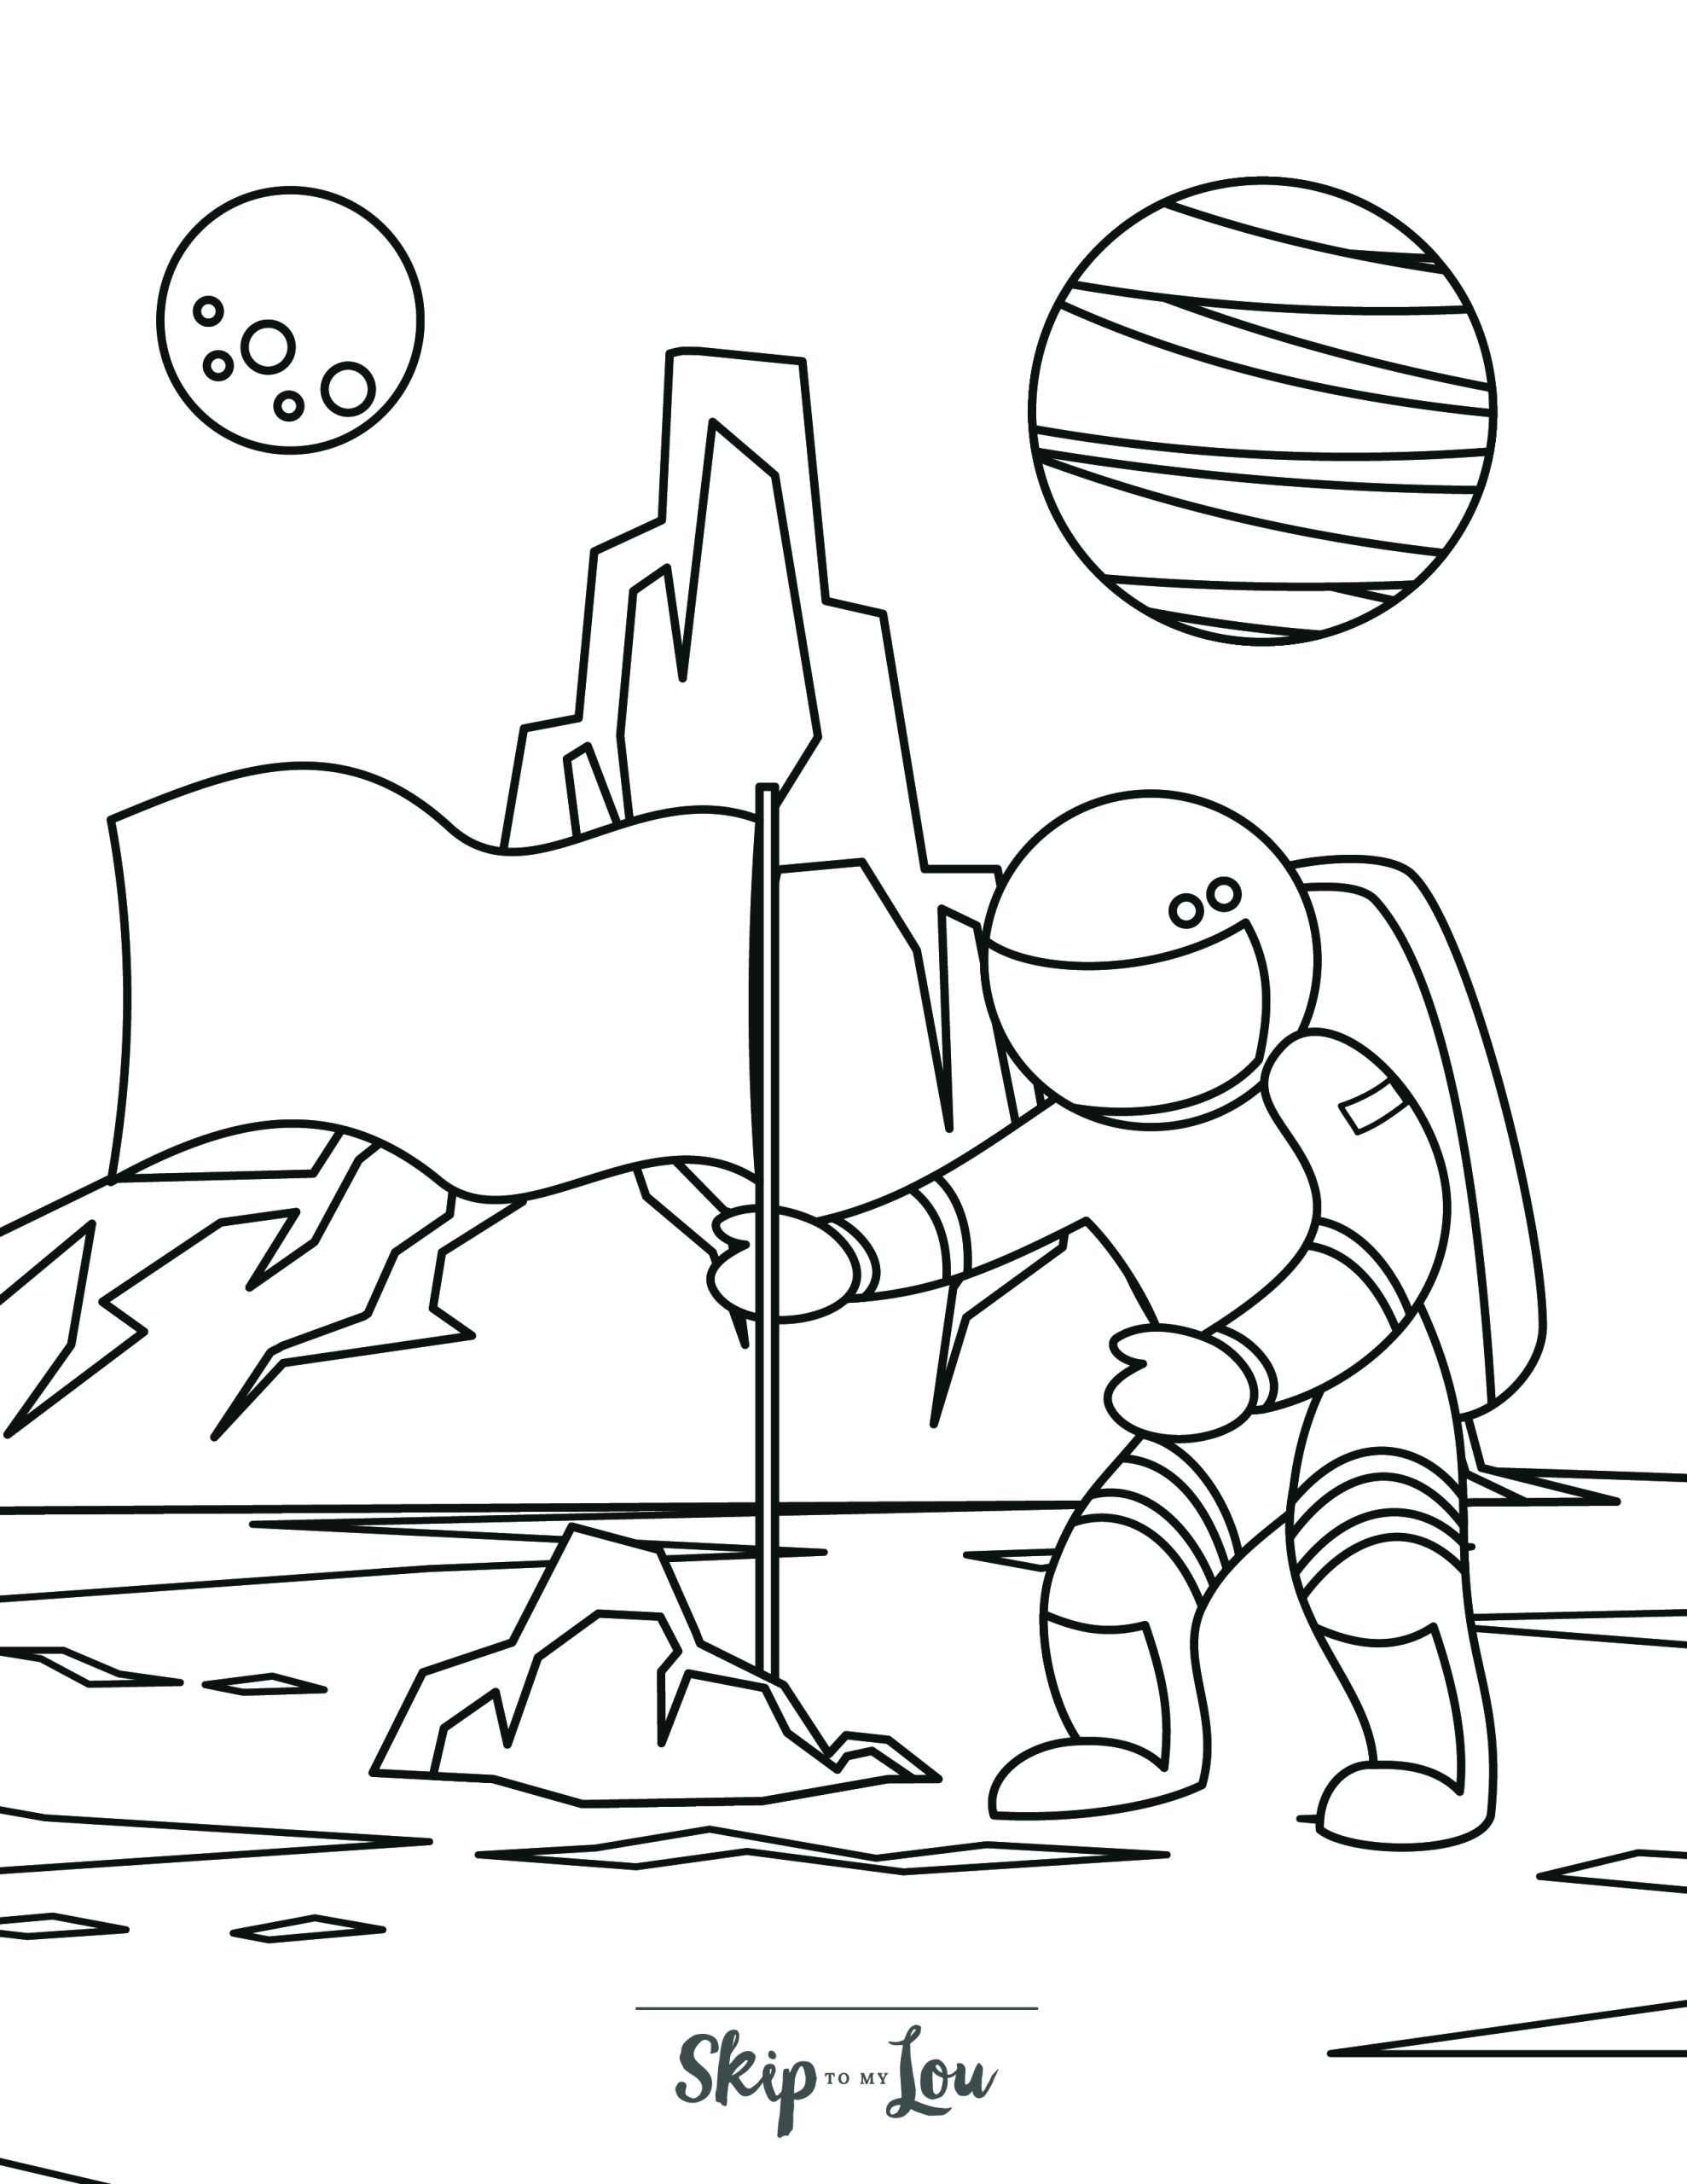 Space Coloring Page 11 - Realistic astronaut planting flag on moon, mountain and planets in background